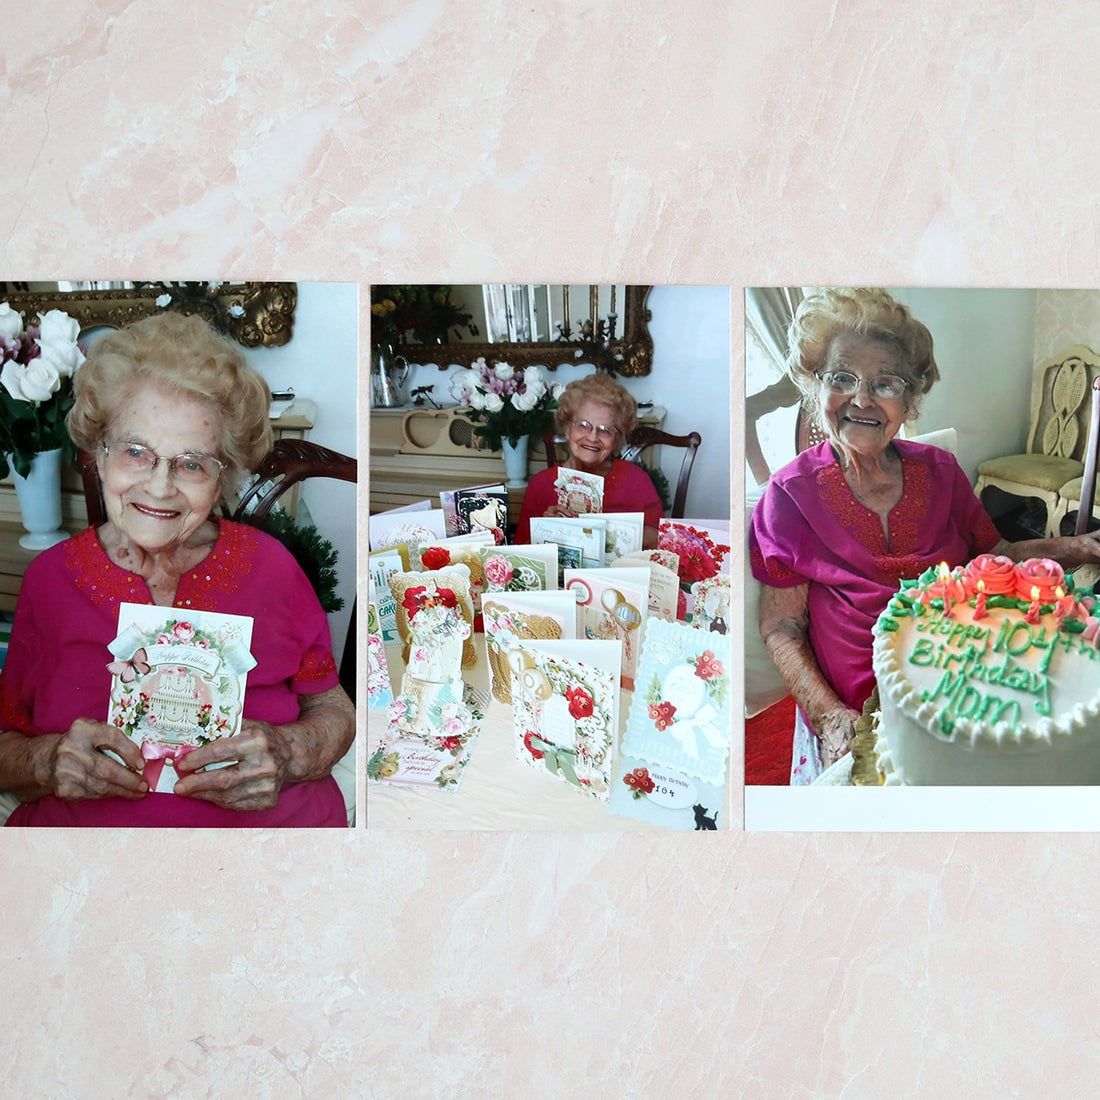 Three pictures of an older woman holding a cake.